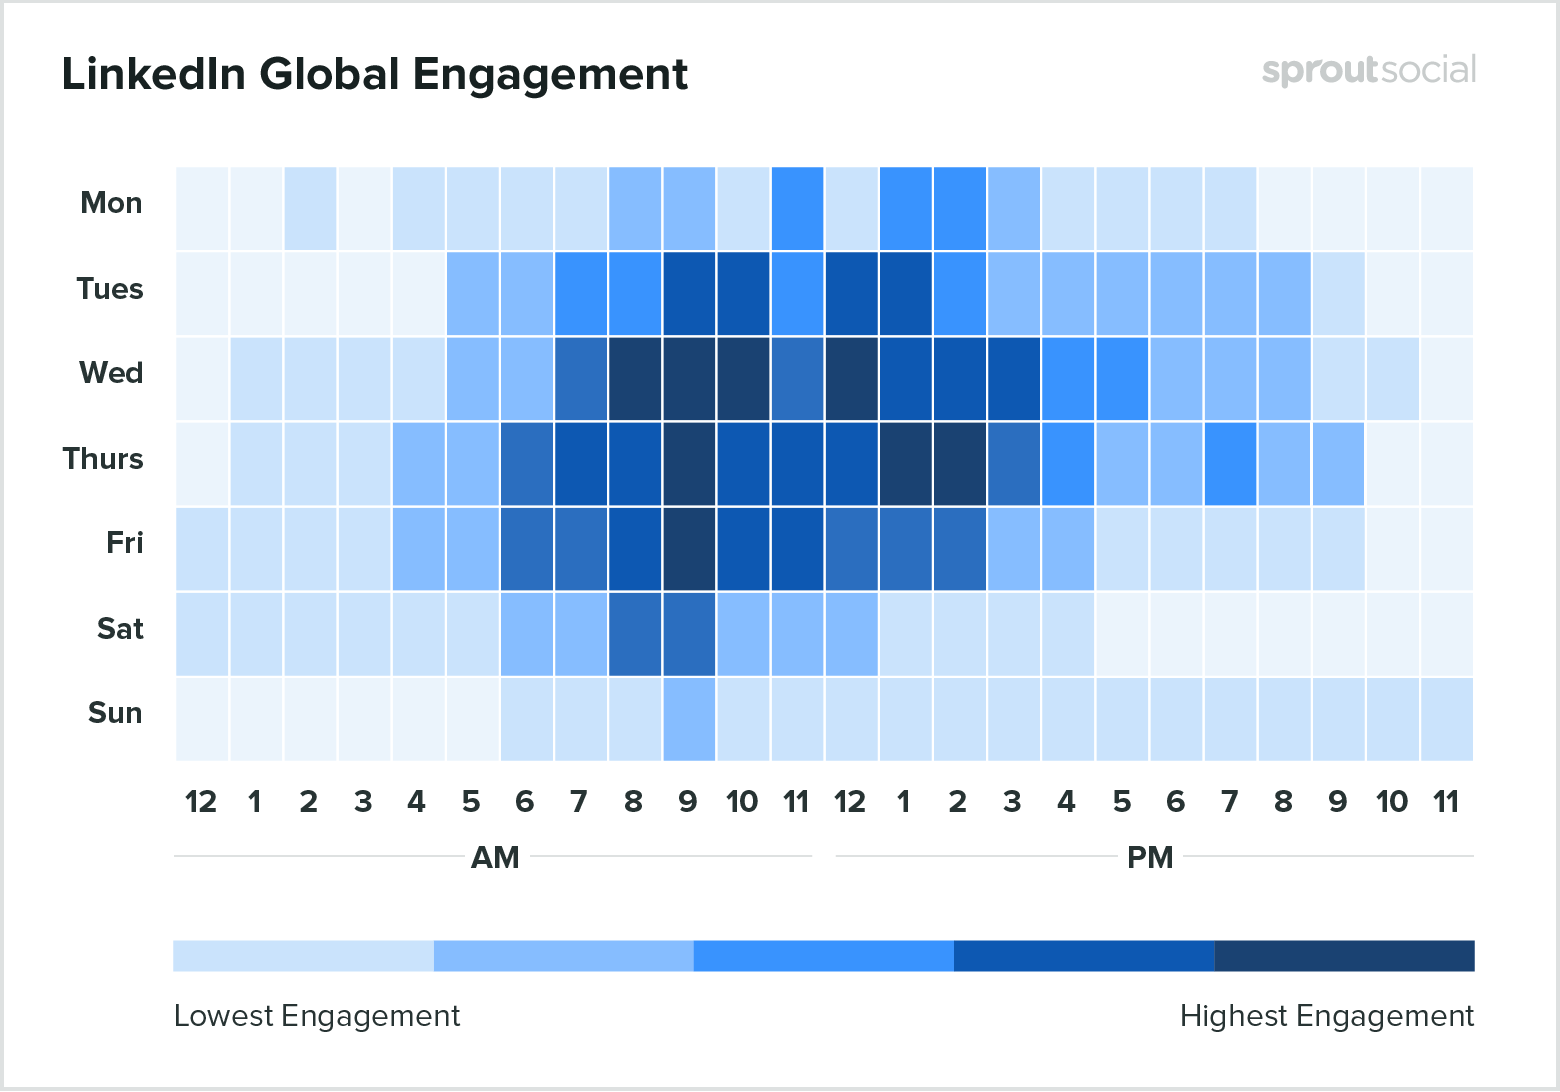 Is There a Generic Best Time to Post On LinkedIn?